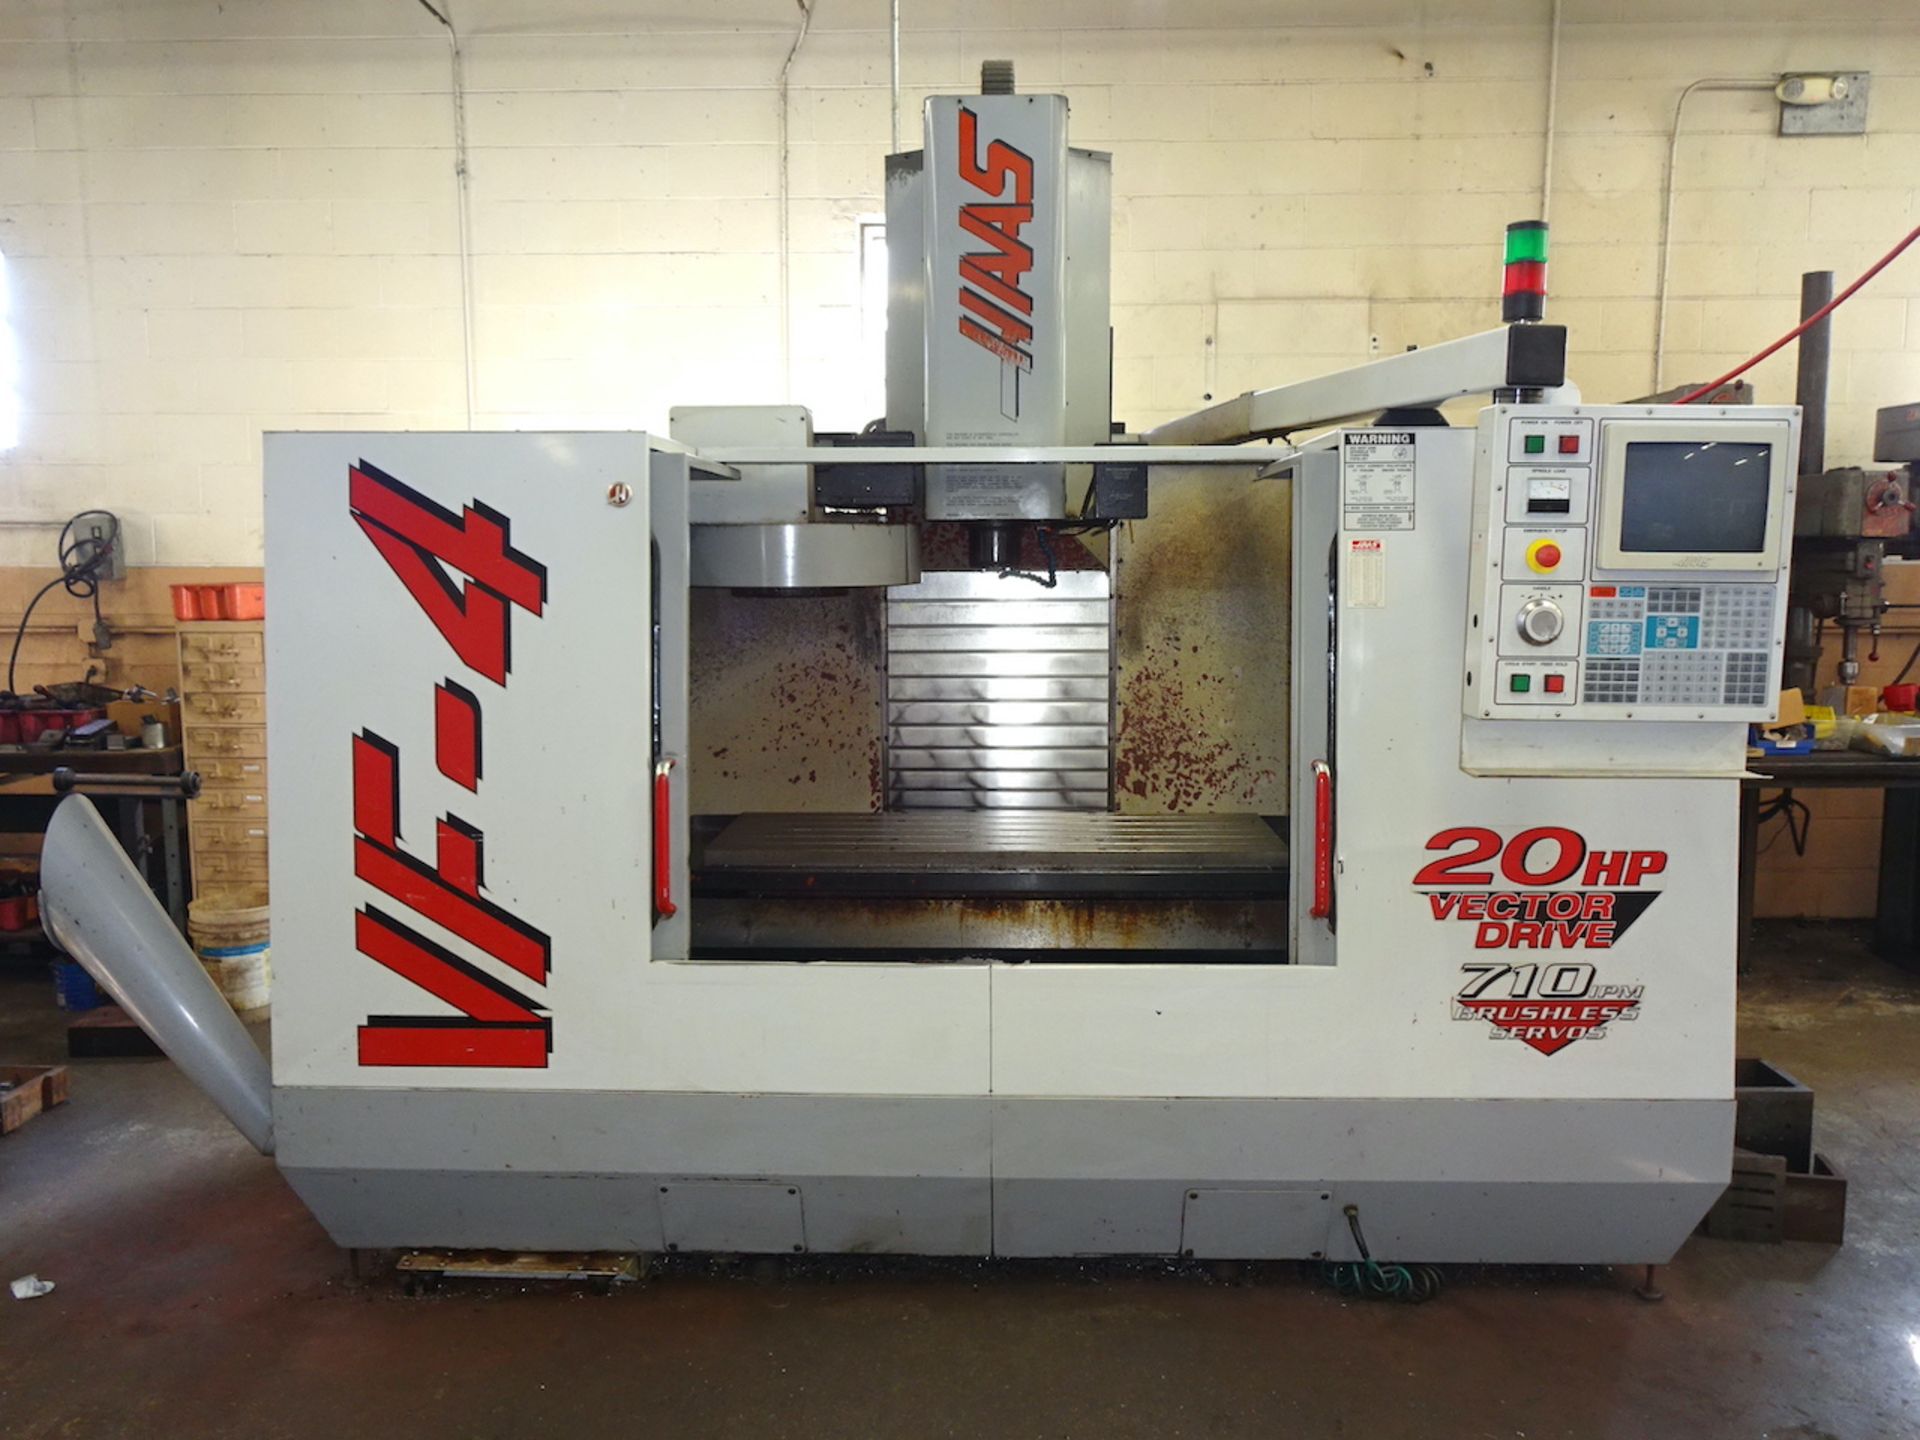 1998 Haas Model VF-4 CNC Vertical Machining Center, S/N 14860, 20 HP Vector Drive, 710 IPM Brushless - Image 4 of 13